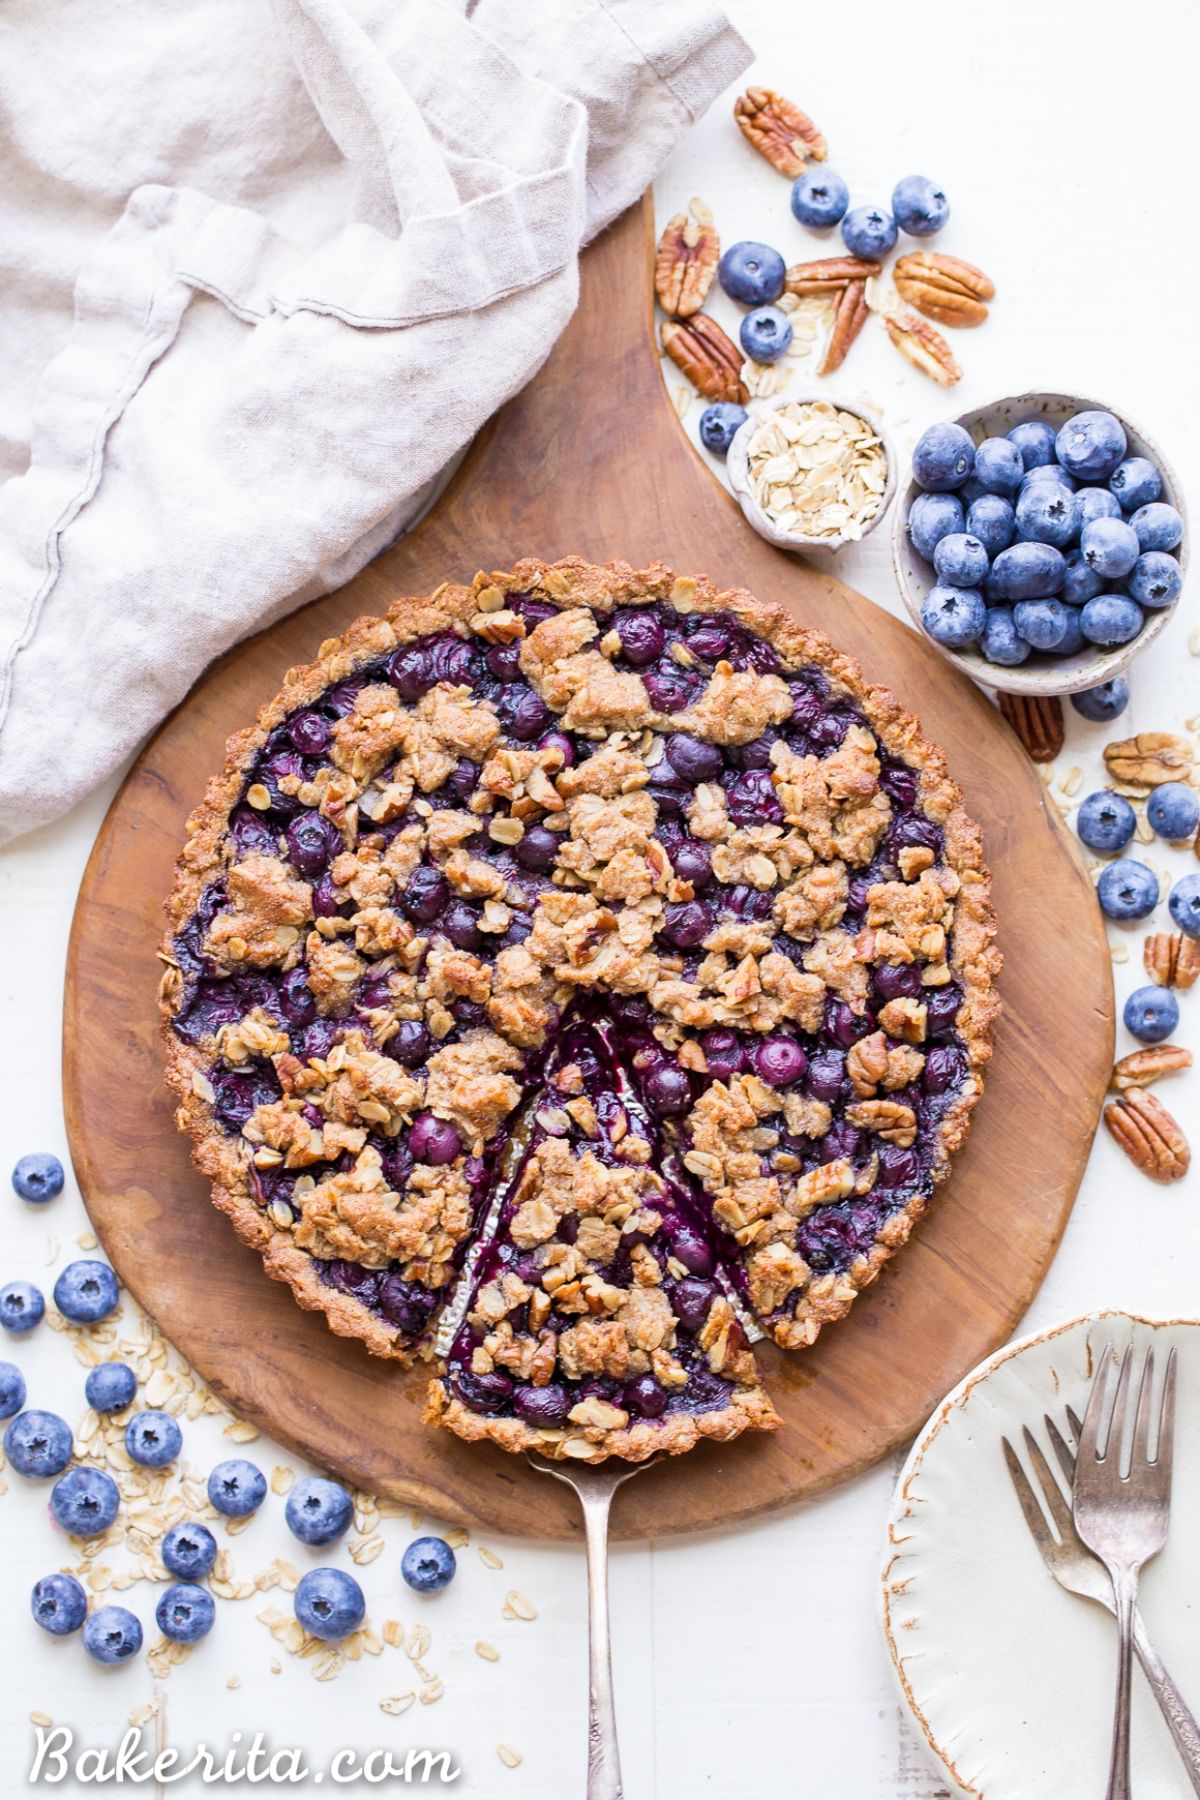 Delicious blueberry tart on a wooden tray.